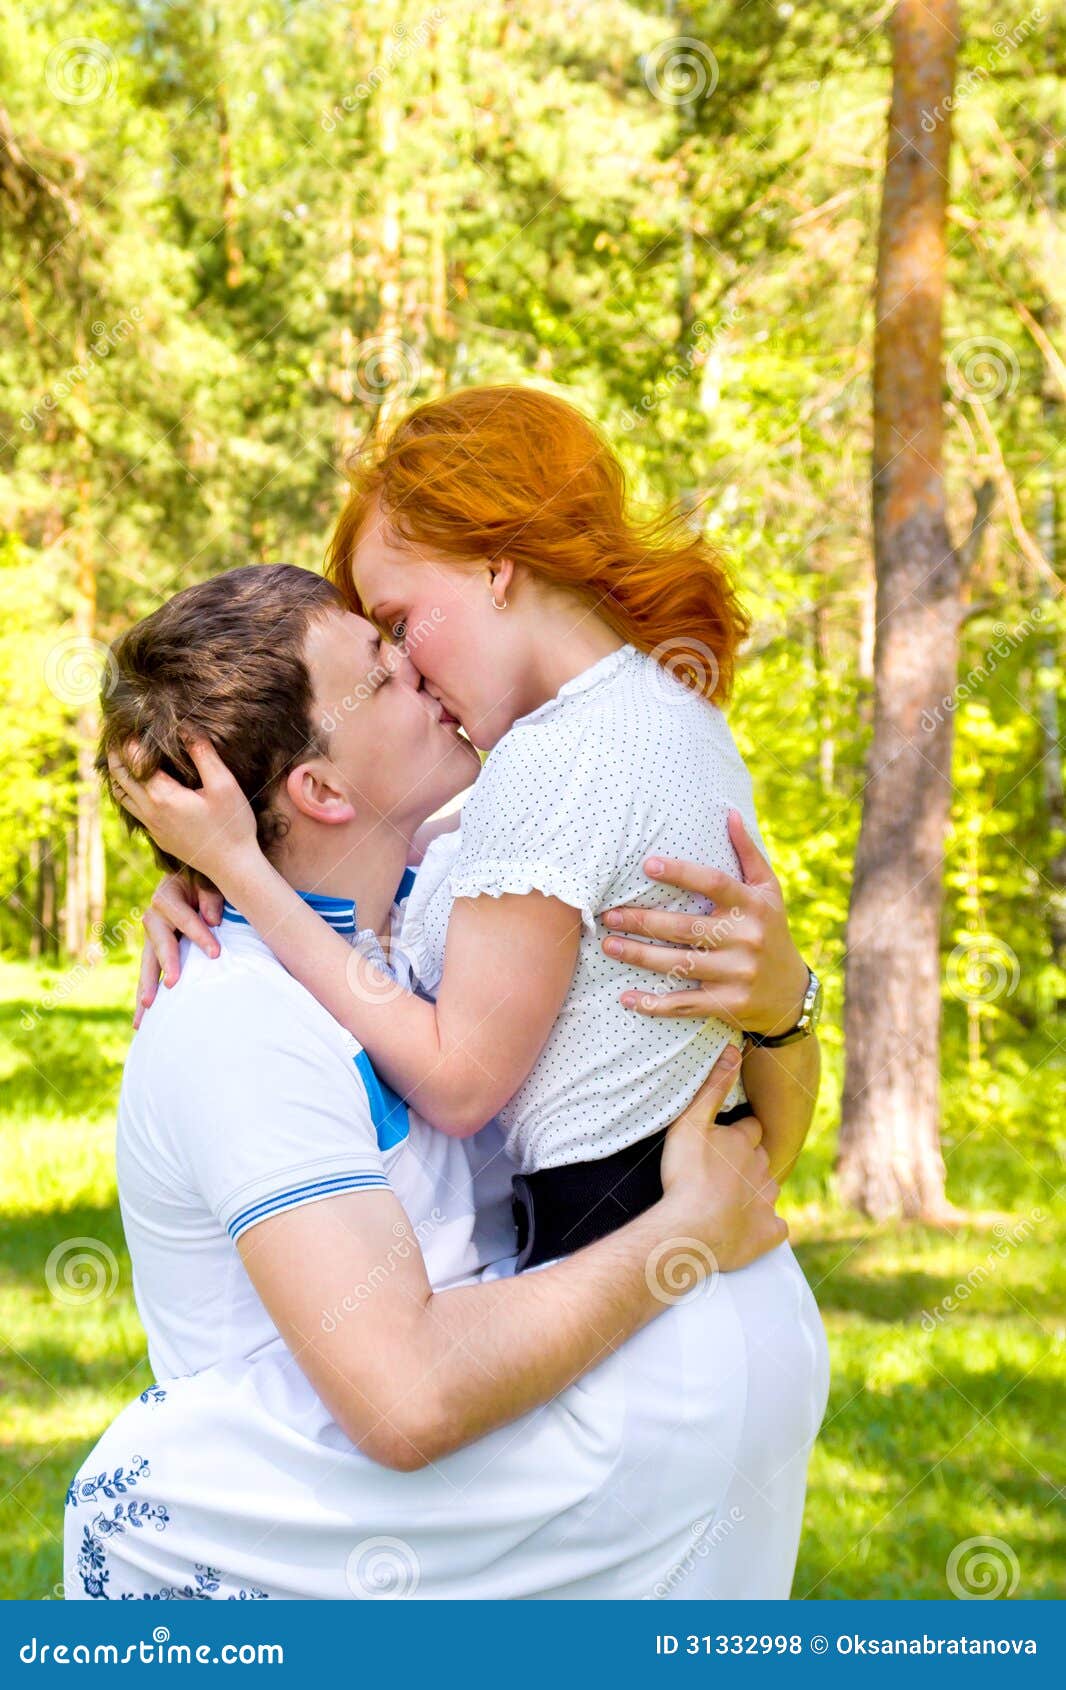 happy-couple-kiss-outdoor-love-posing-kissing-spring-summer-park-sunny-weather-young-boy-girl-having-fun-31332998.jpg